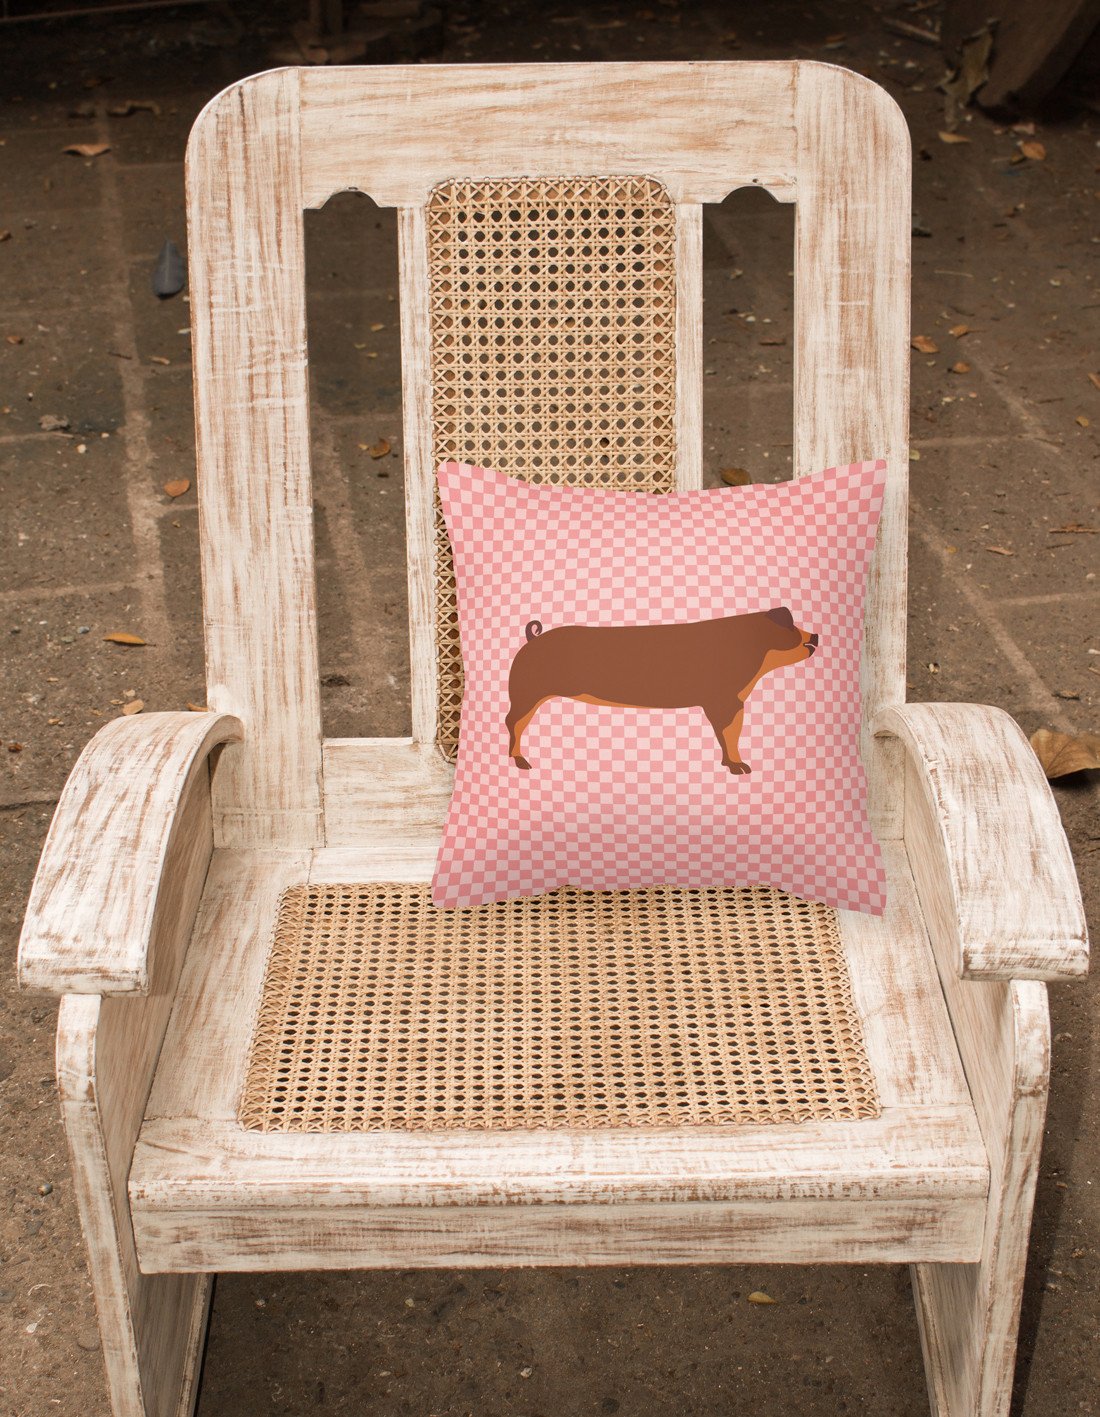 Duroc Pig Pink Check Fabric Decorative Pillow BB7942PW1818 by Caroline's Treasures